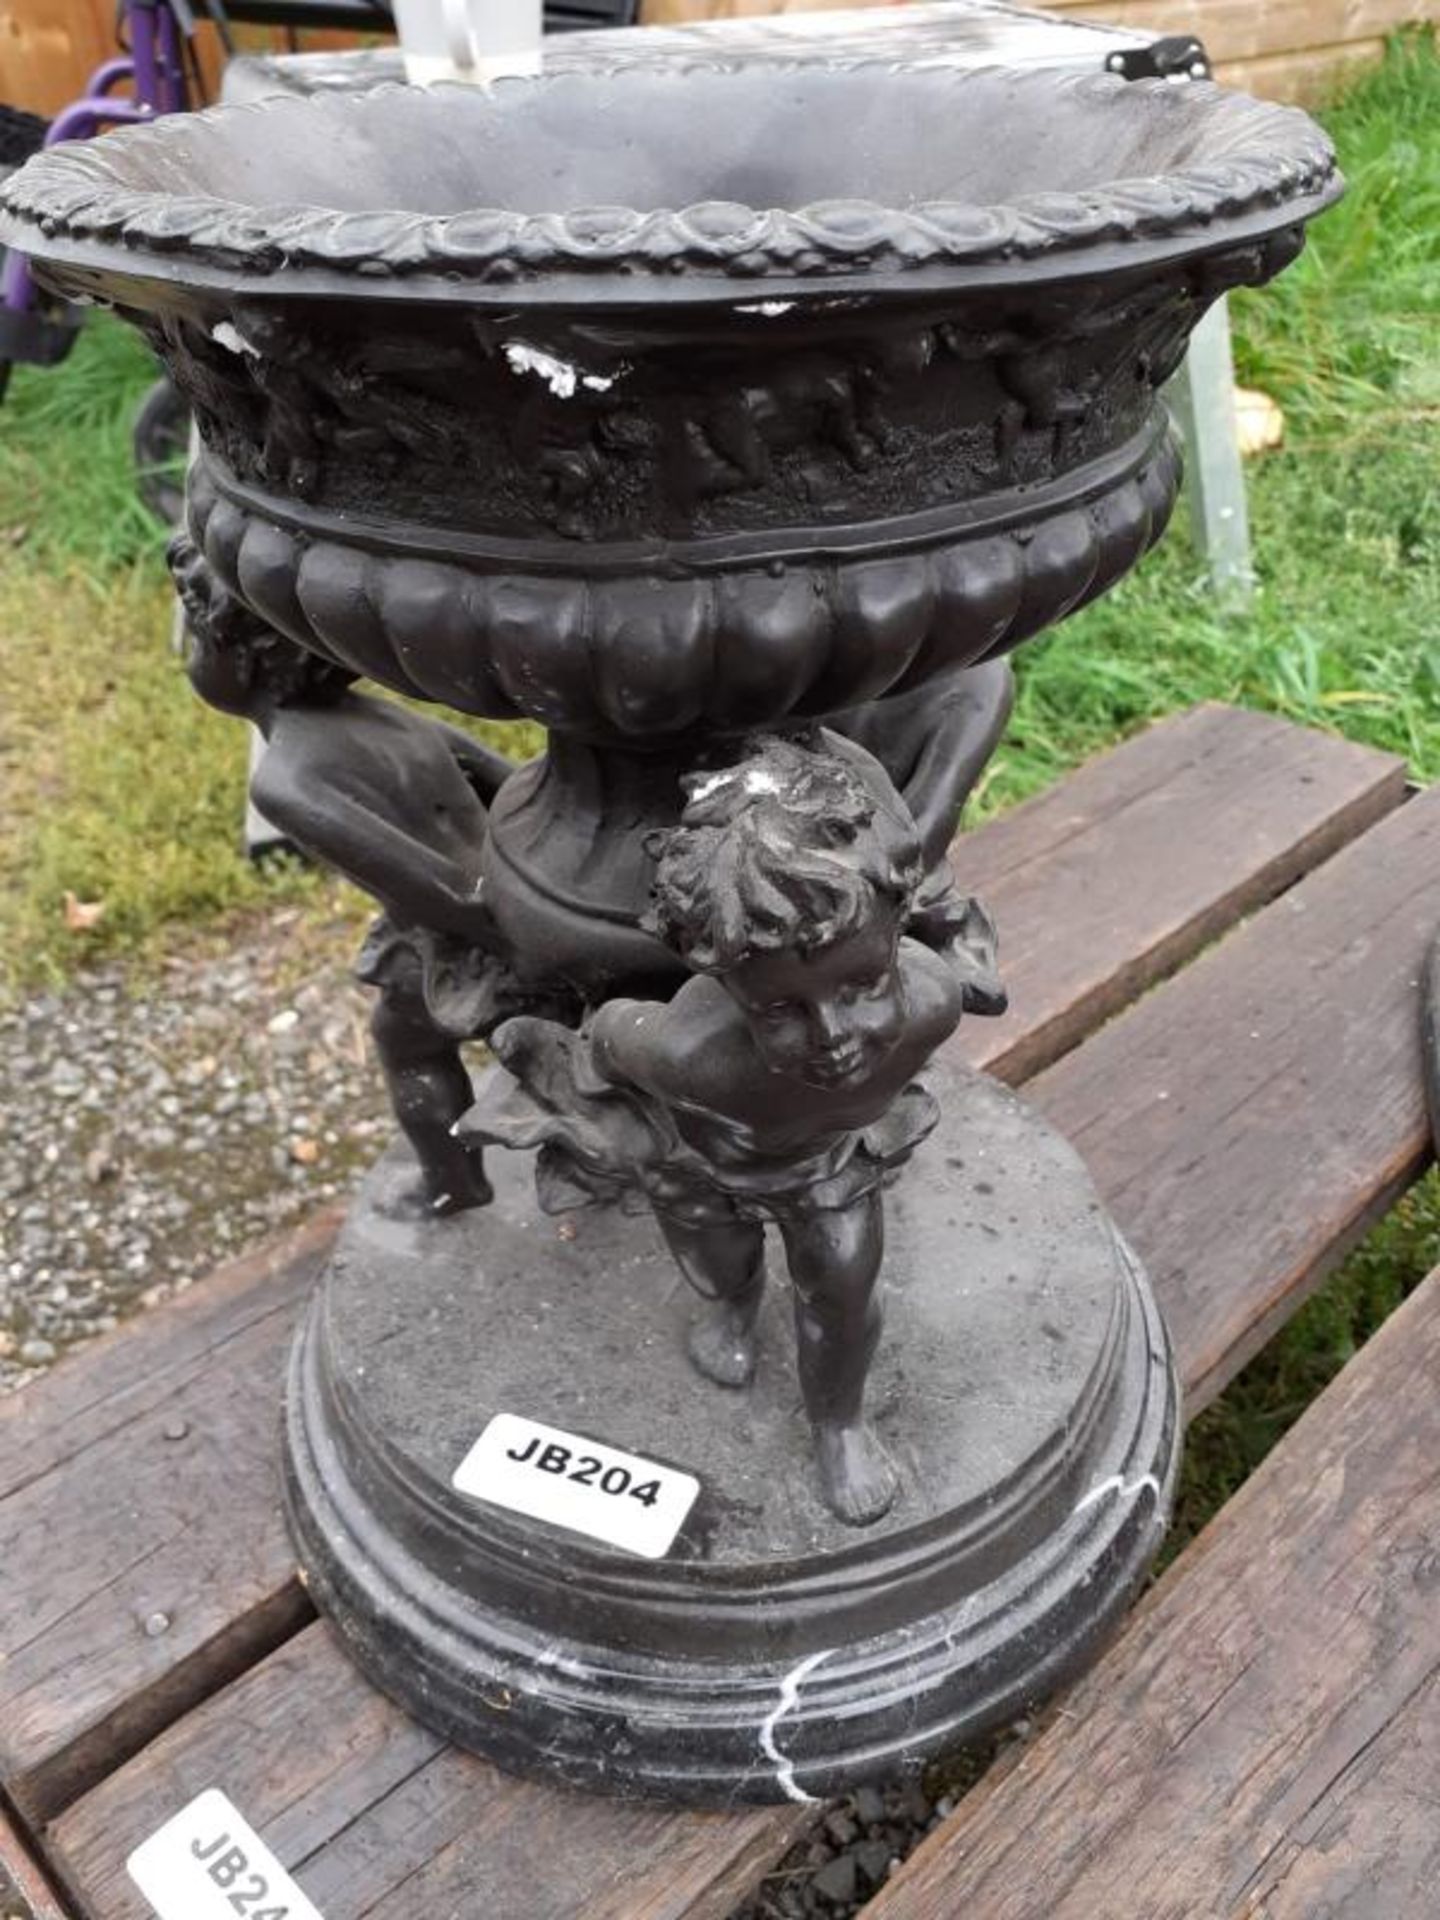 1 x Large Table Statue / Sculpture Of 3 Cherubs Carrying A Planter In Black Metal With Marble / Gran